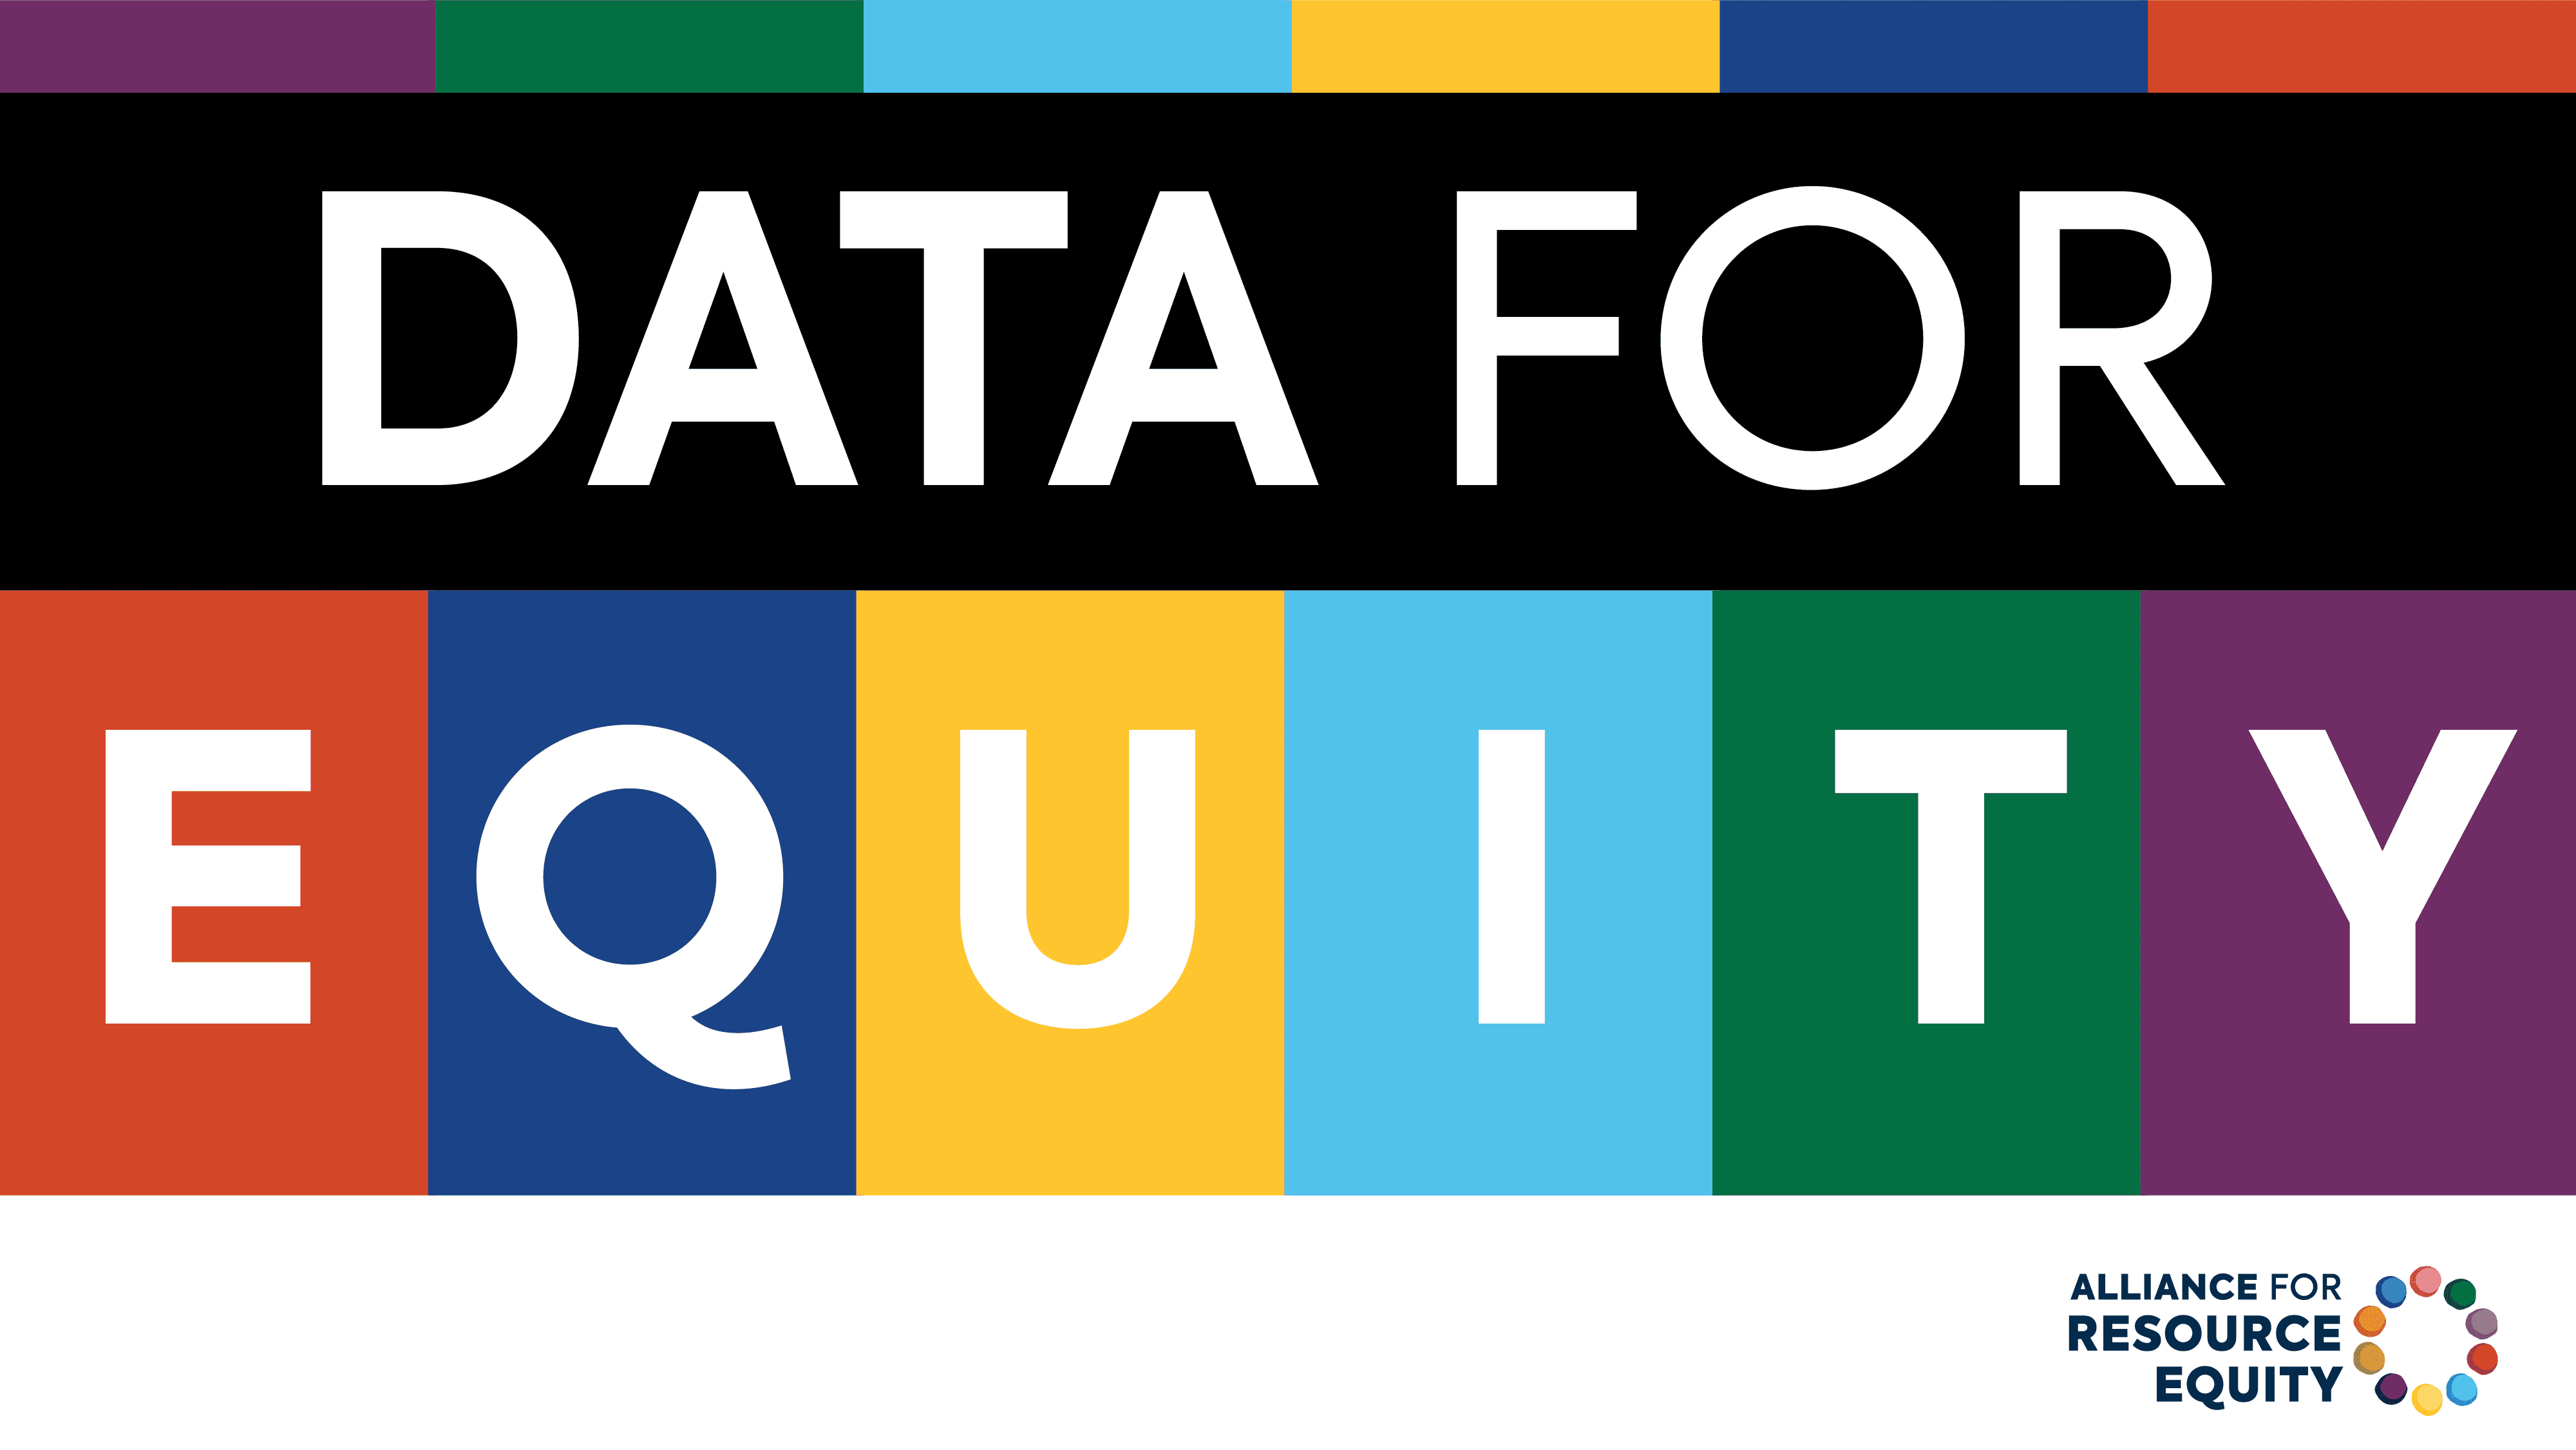 Data for Equity banner with different colors